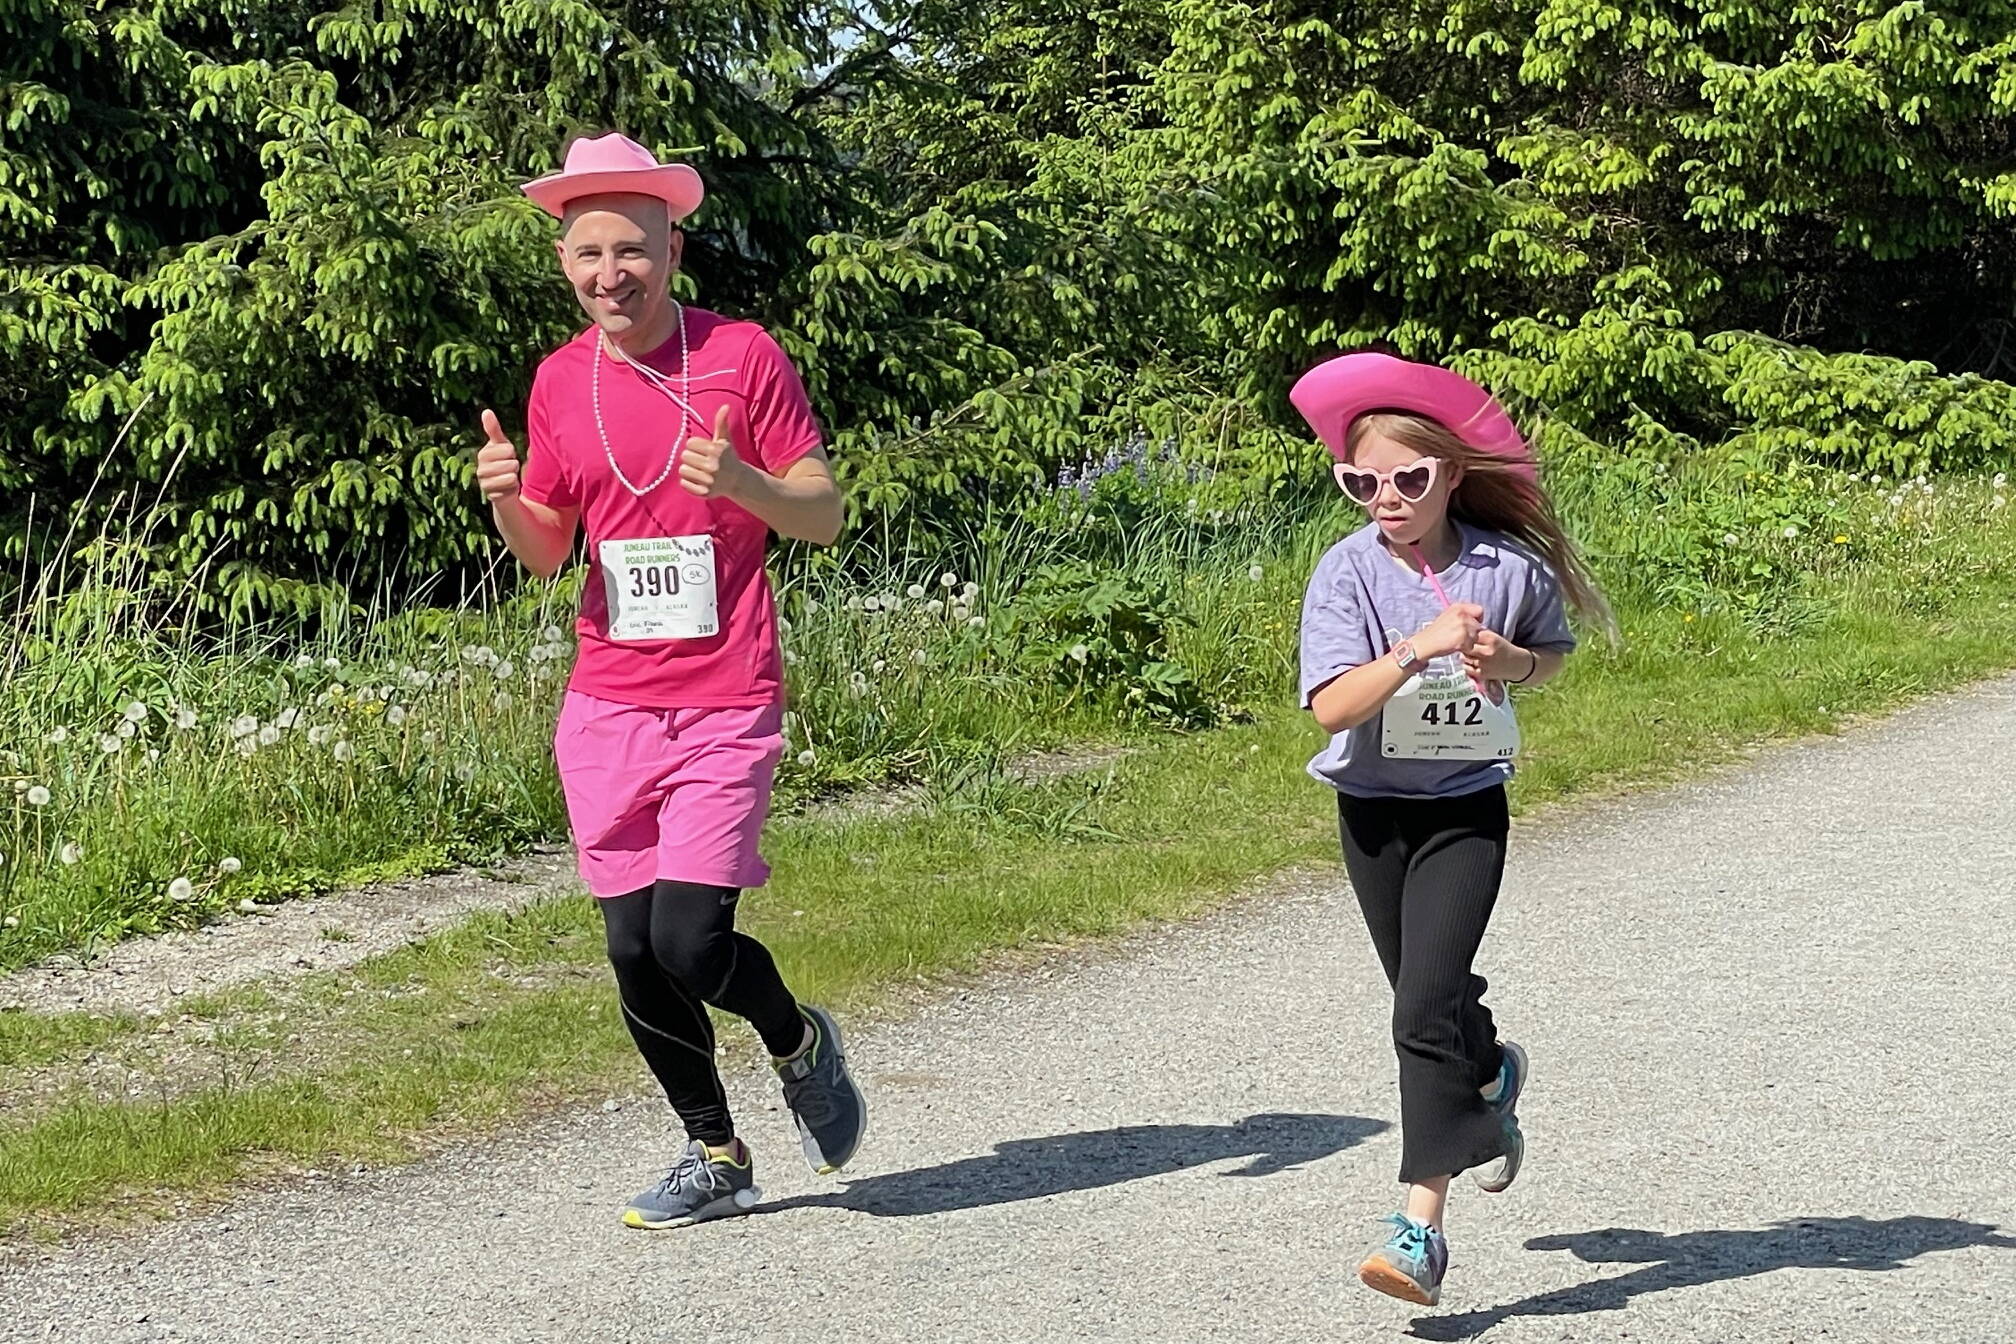 In the spirit of Dolly Parton’s country music roots, race participant Mendenhall River Community School Principal Eric Filardi runs in costume with young Lucy Vogel wearing heart-shaped sunglasses as they enjoy the sunny Saturday weather on the Airport Dike Trail race course. About 85 runners participated, many wearing pearls and pink hats provided at the starting tent. (Laurie Craig / Juneau Empire)